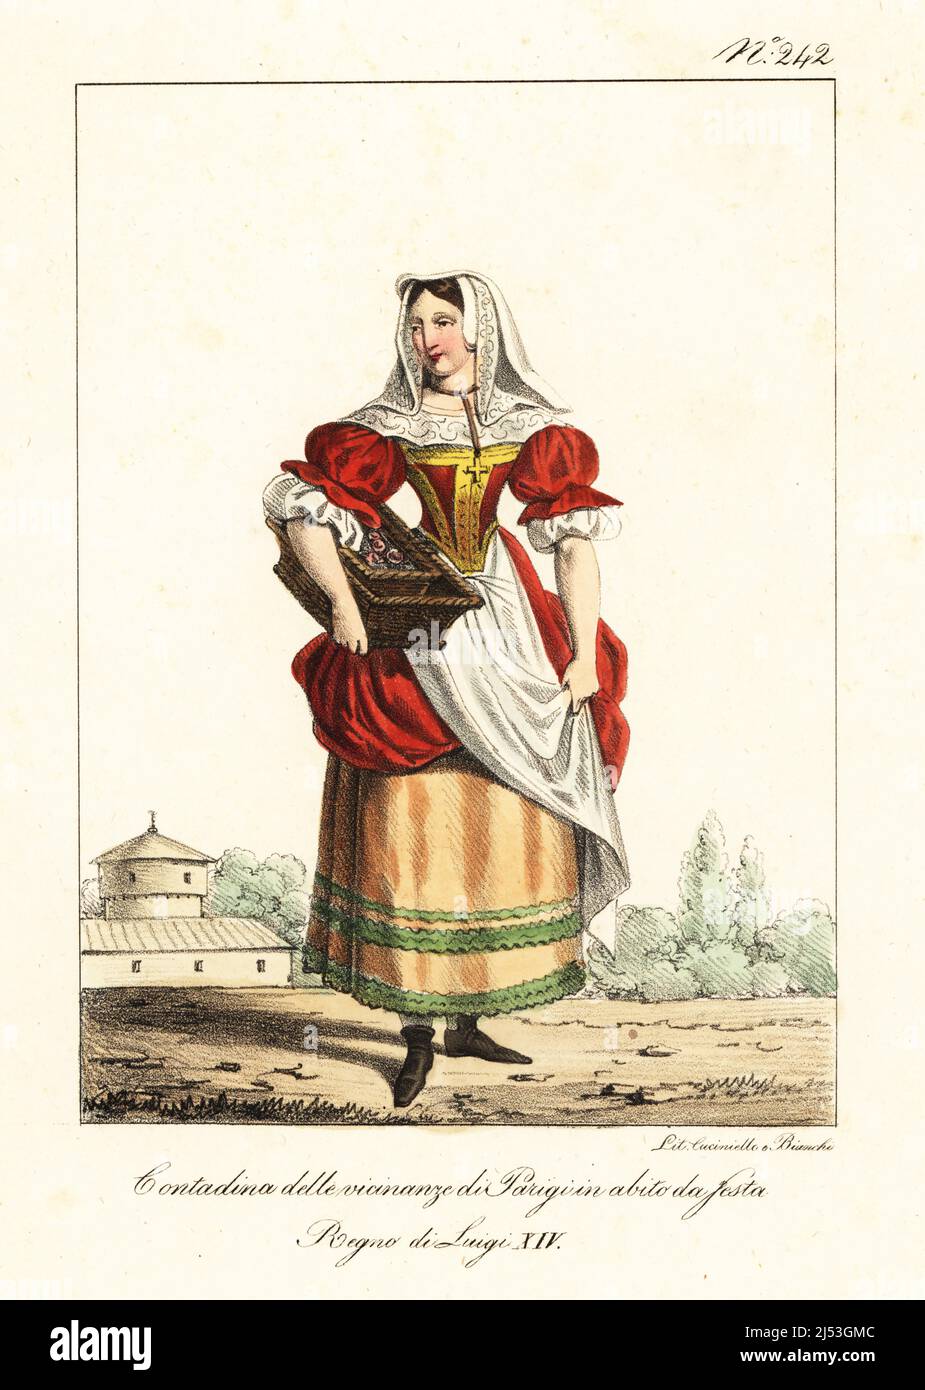 Parisian peasant in festival clothes, 17th century. In lace veil, scarlet gown with gold bodice, lace tucker, apron, embroidered petticoats, bootlets, with basket. Paysanne des environs de Paris, en habit de Fete. Regne de Louis XIV. Handcoloured lithograph by Lorenzo Bianchi and Domenico Cuciniello after Hippolyte Lecomte from Costumi civili e militari della monarchia francese dal 1200 al 1820, Naples, 1825. Italian edition of Lecomte’s Civilian and military costumes of the French monarchy from 1200 to 1820. Stock Photo